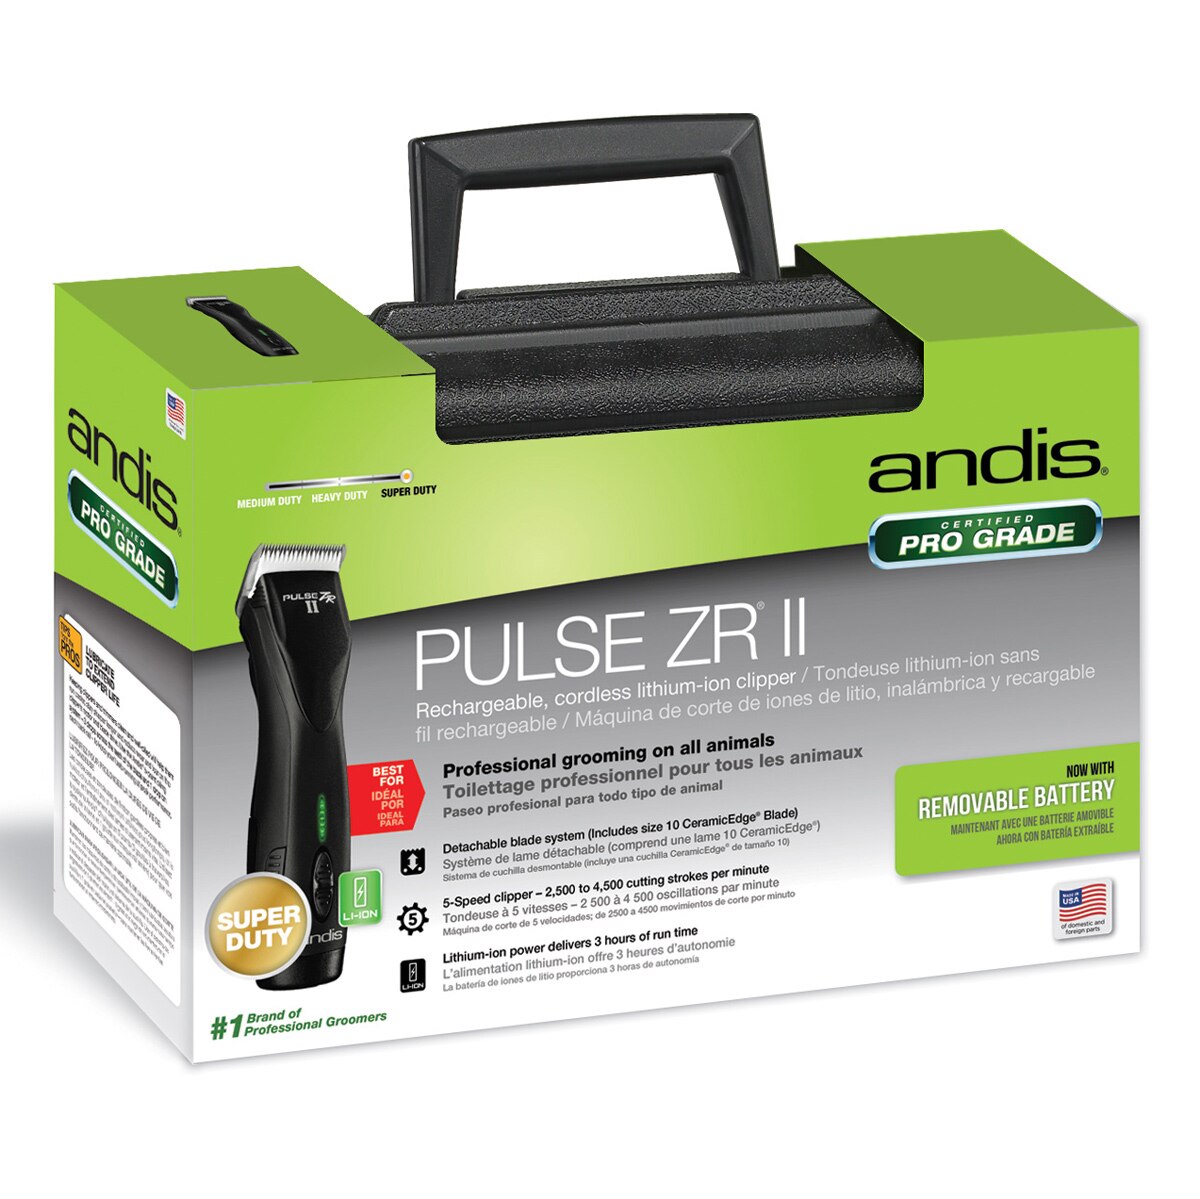 andis pulse zrii